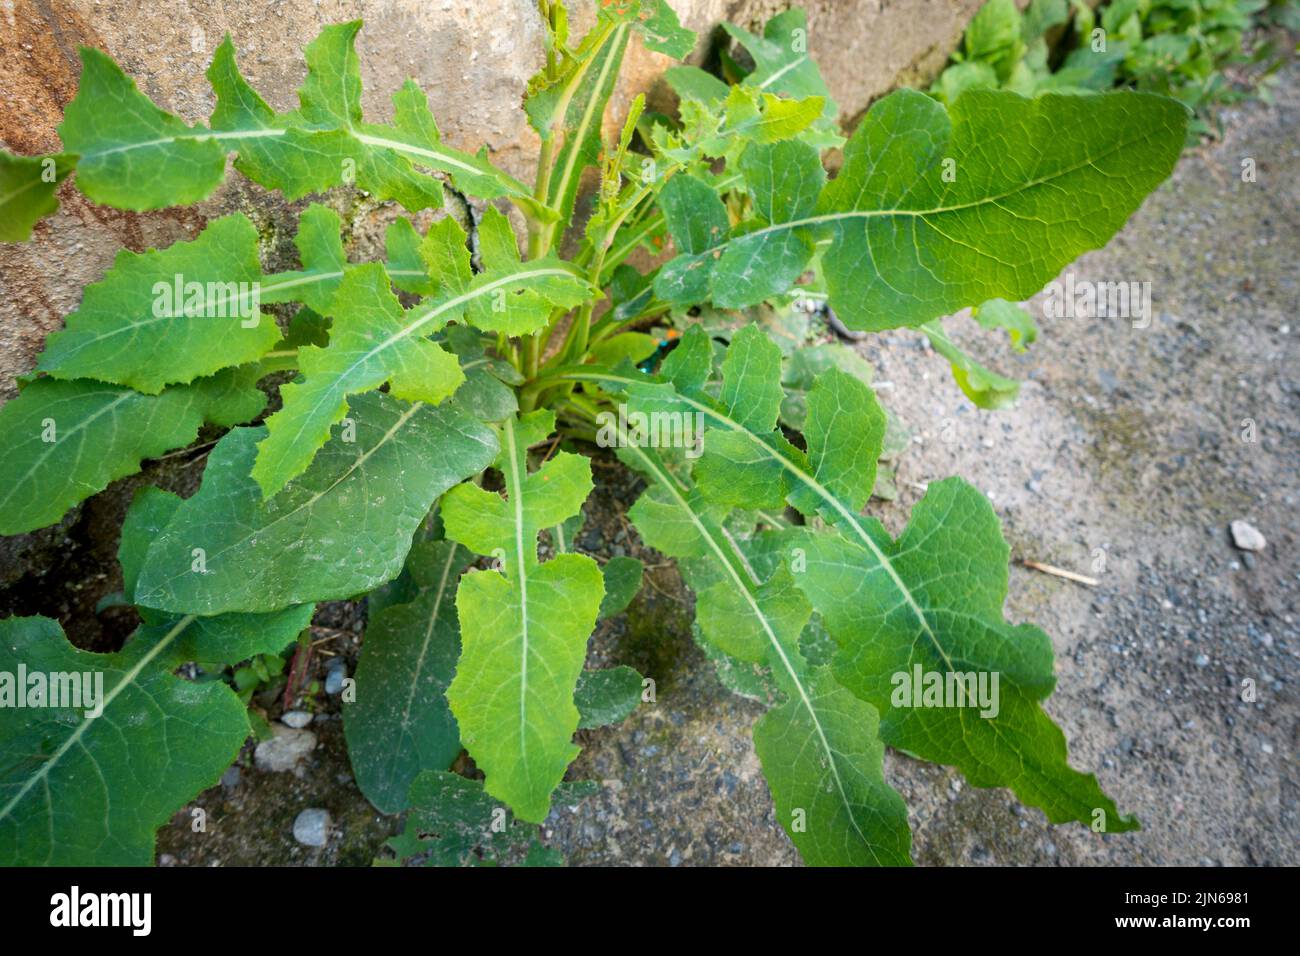 A close up shot of Lactuca serriola plant, also called prickly lettuce. Uttarakhand India. Stock Photo